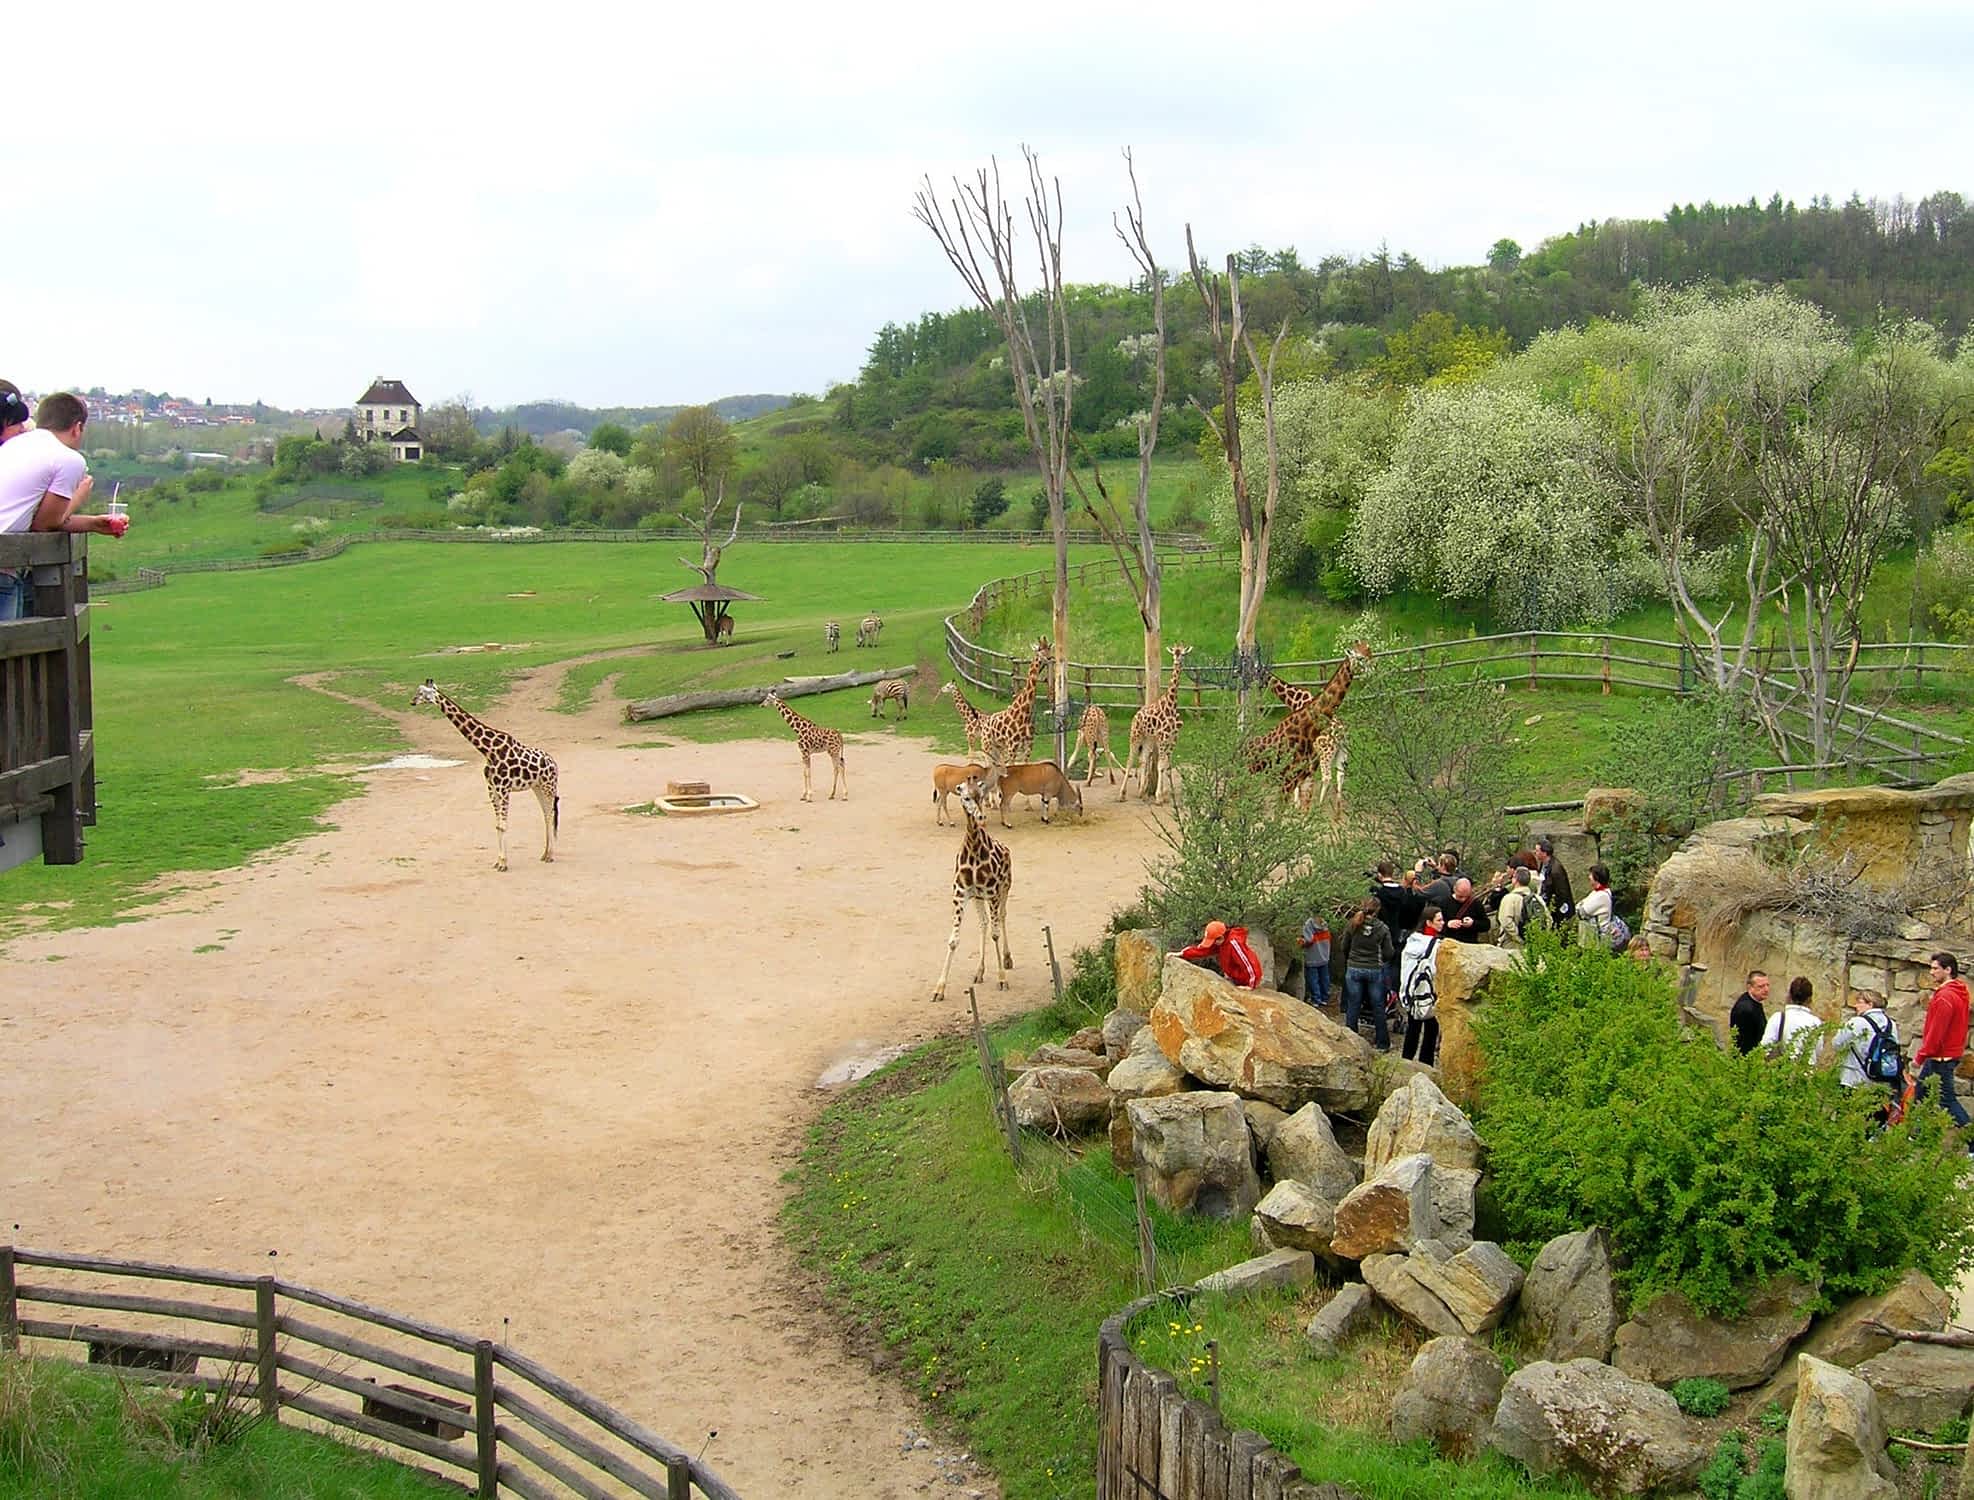 Giraffe exposition is one of the most visited part of the Prague Zoo